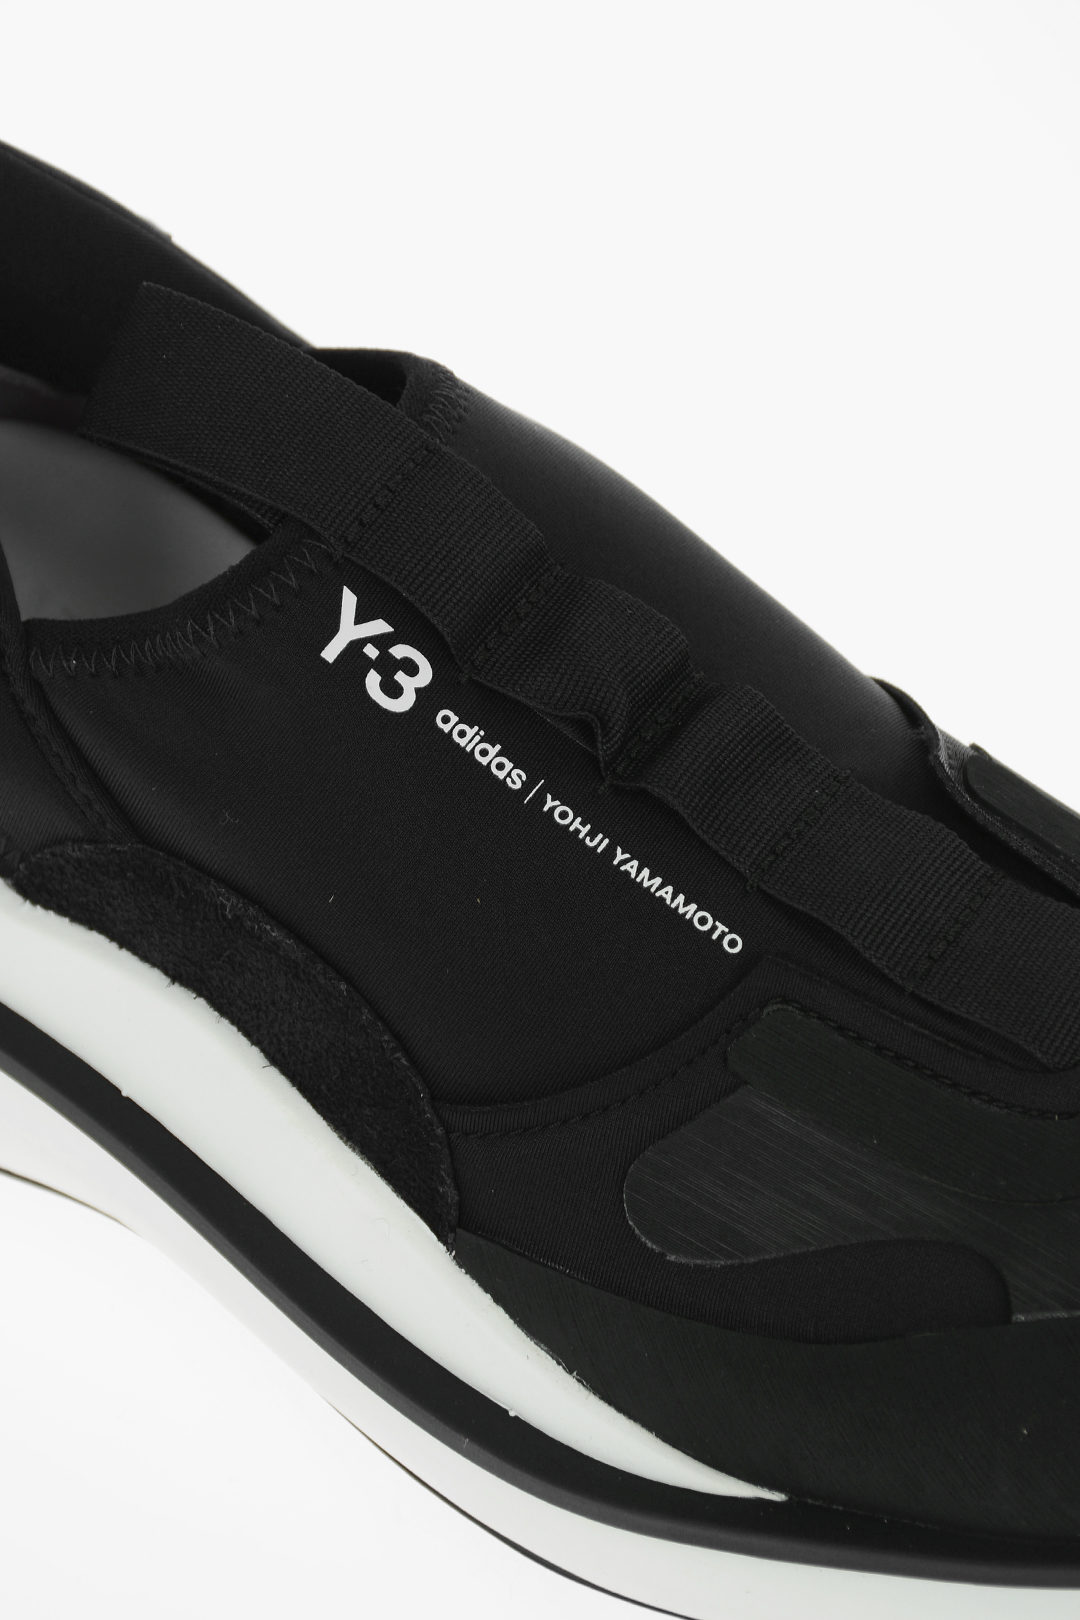 Rundt om selv Investere Y-3 by Yohji Yamamoto ADIDAS Leather Details QISAN COZY Slip-On Sneakers  unisex men women - Glamood Outlet